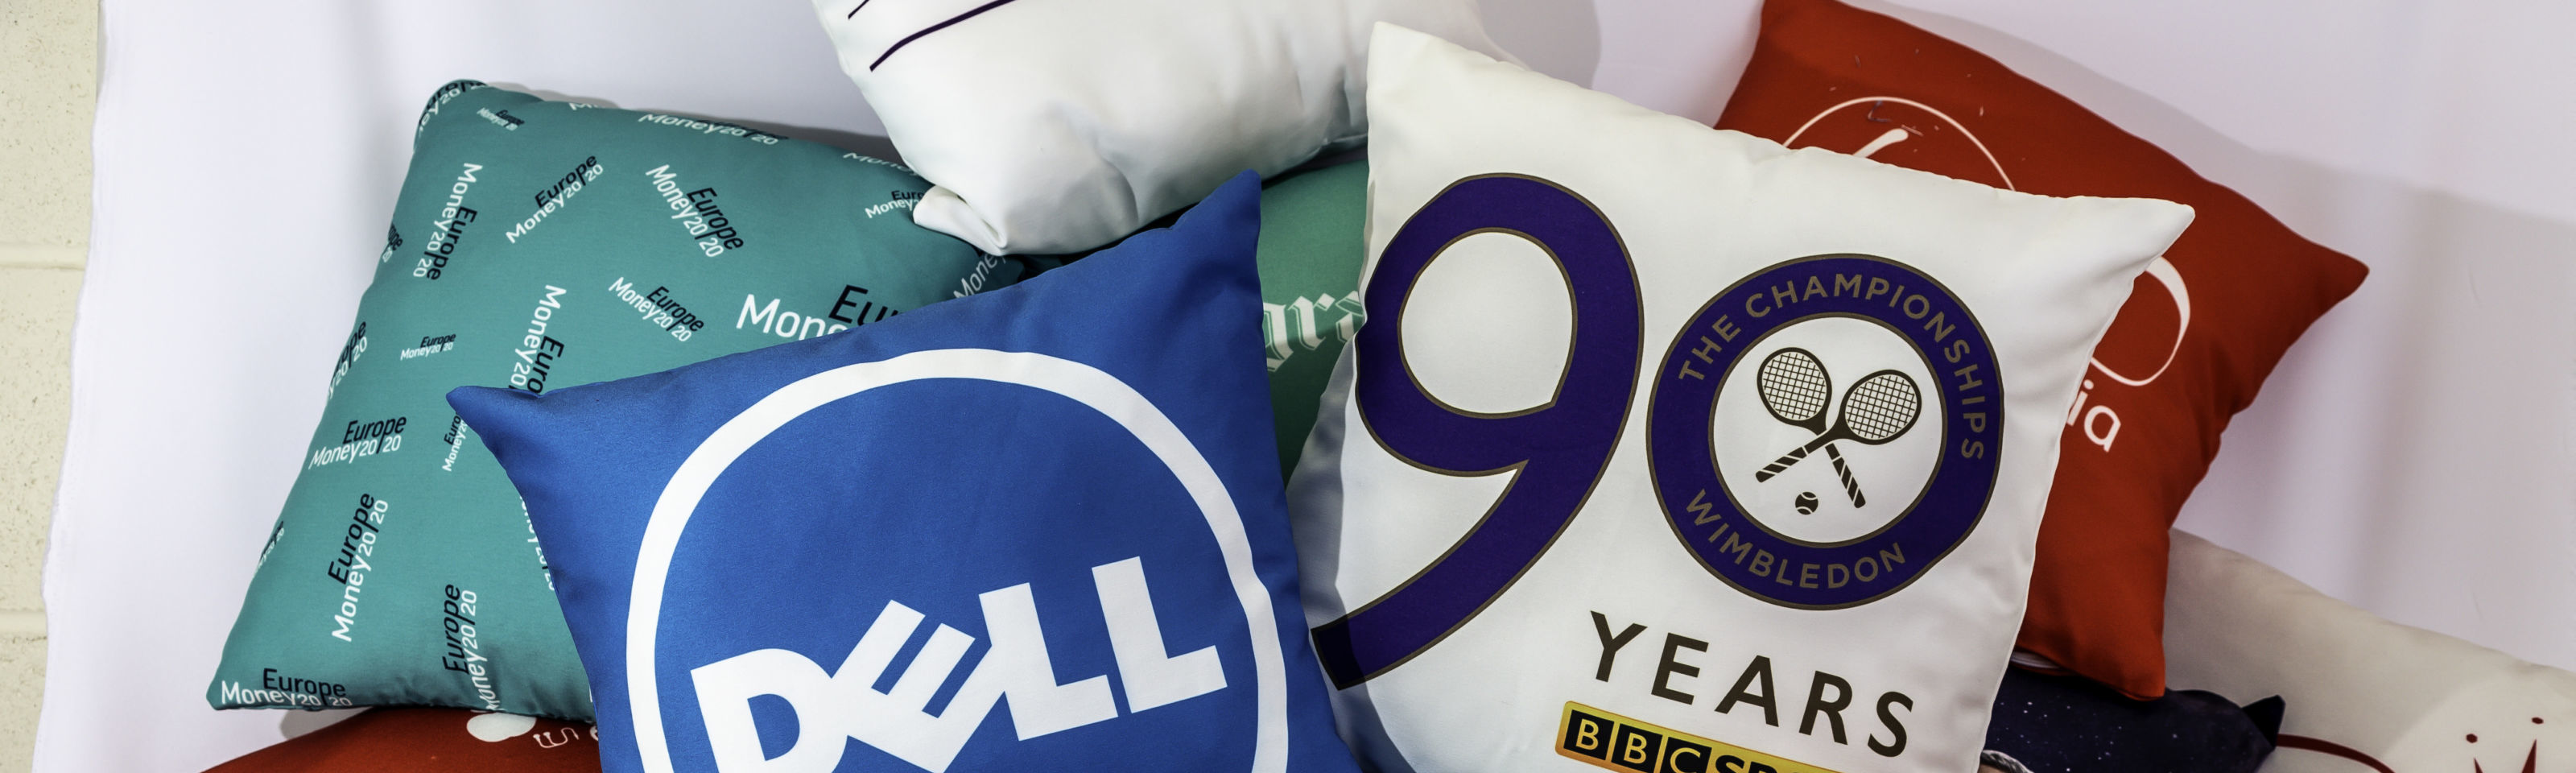 Branded Promotional Cushion Covers